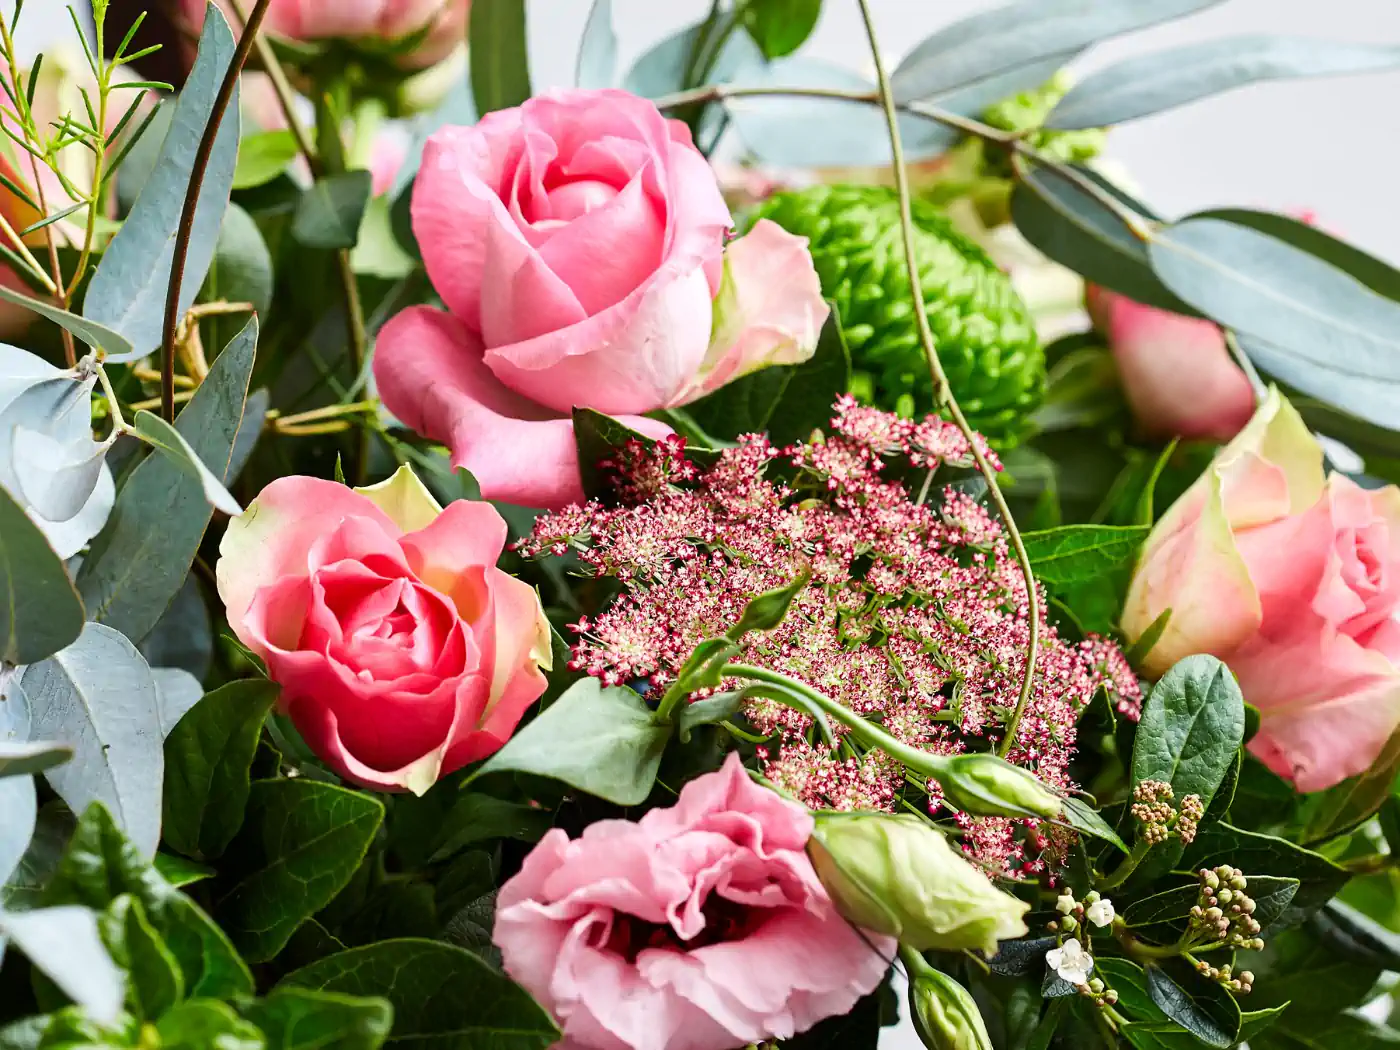 A vibrant very unusual living arrangements featuring pink roses, delicate pink blooms, and lush green foliage, showcasing a beautifully arranged flower collection. The image highlights the elegance and freshness of the flowers, perfect for various occasions. All Flower Arrangements Collection. Fabulous Flowers and Gifts.